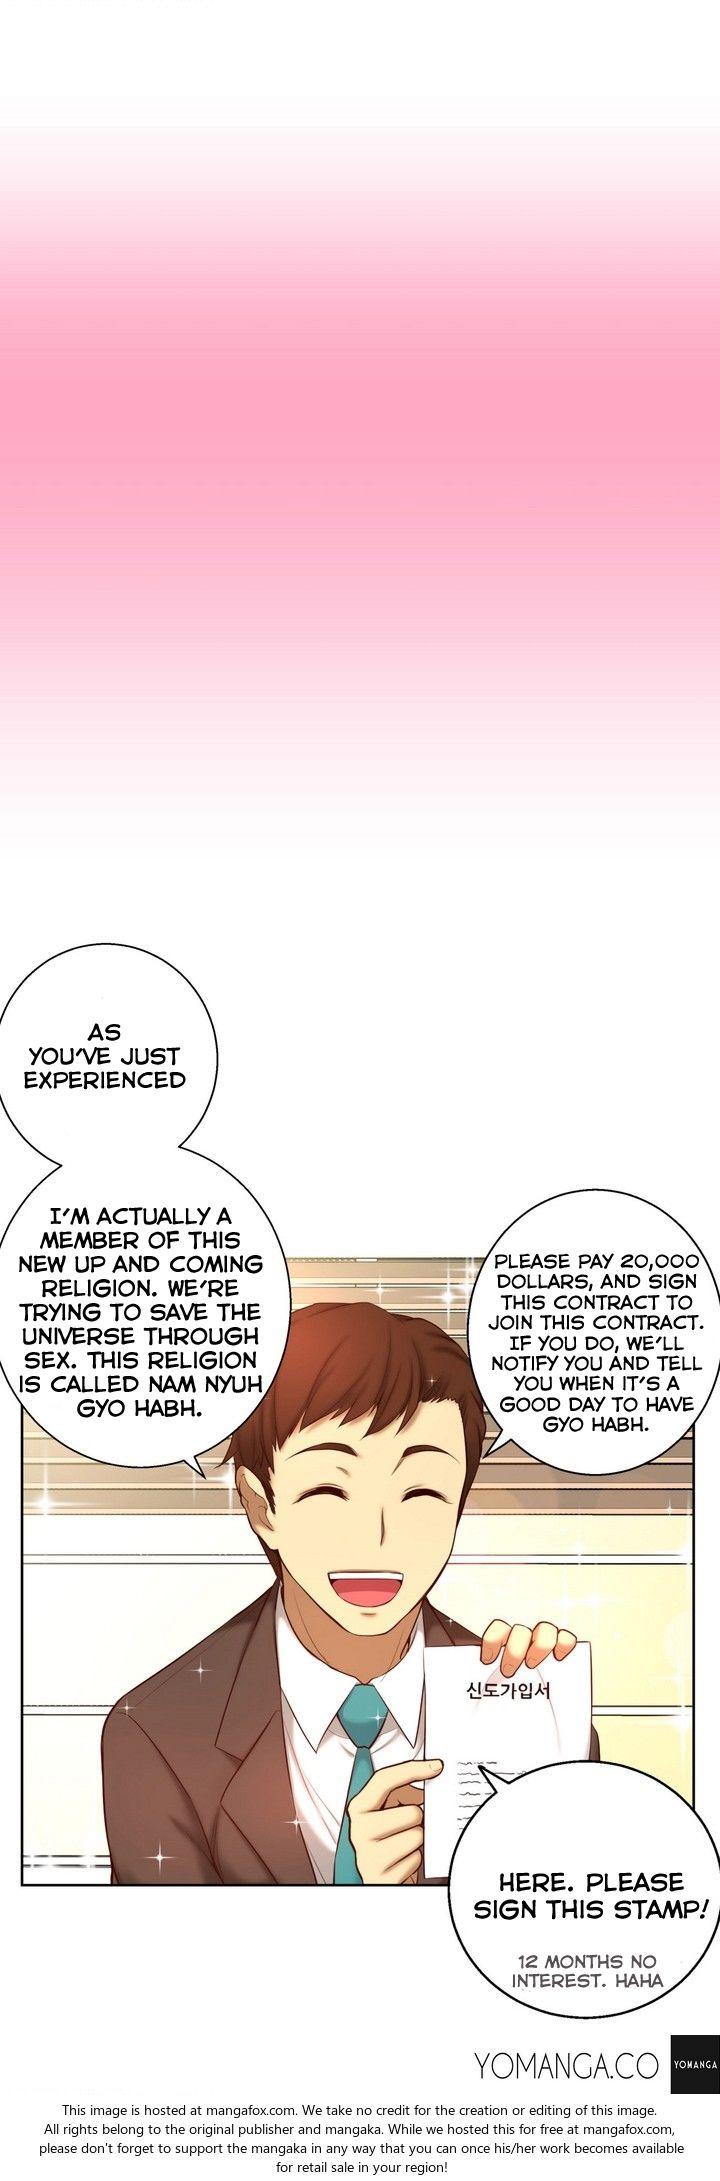 [Donggul Gom] She is Young (English) Part 1/2 883